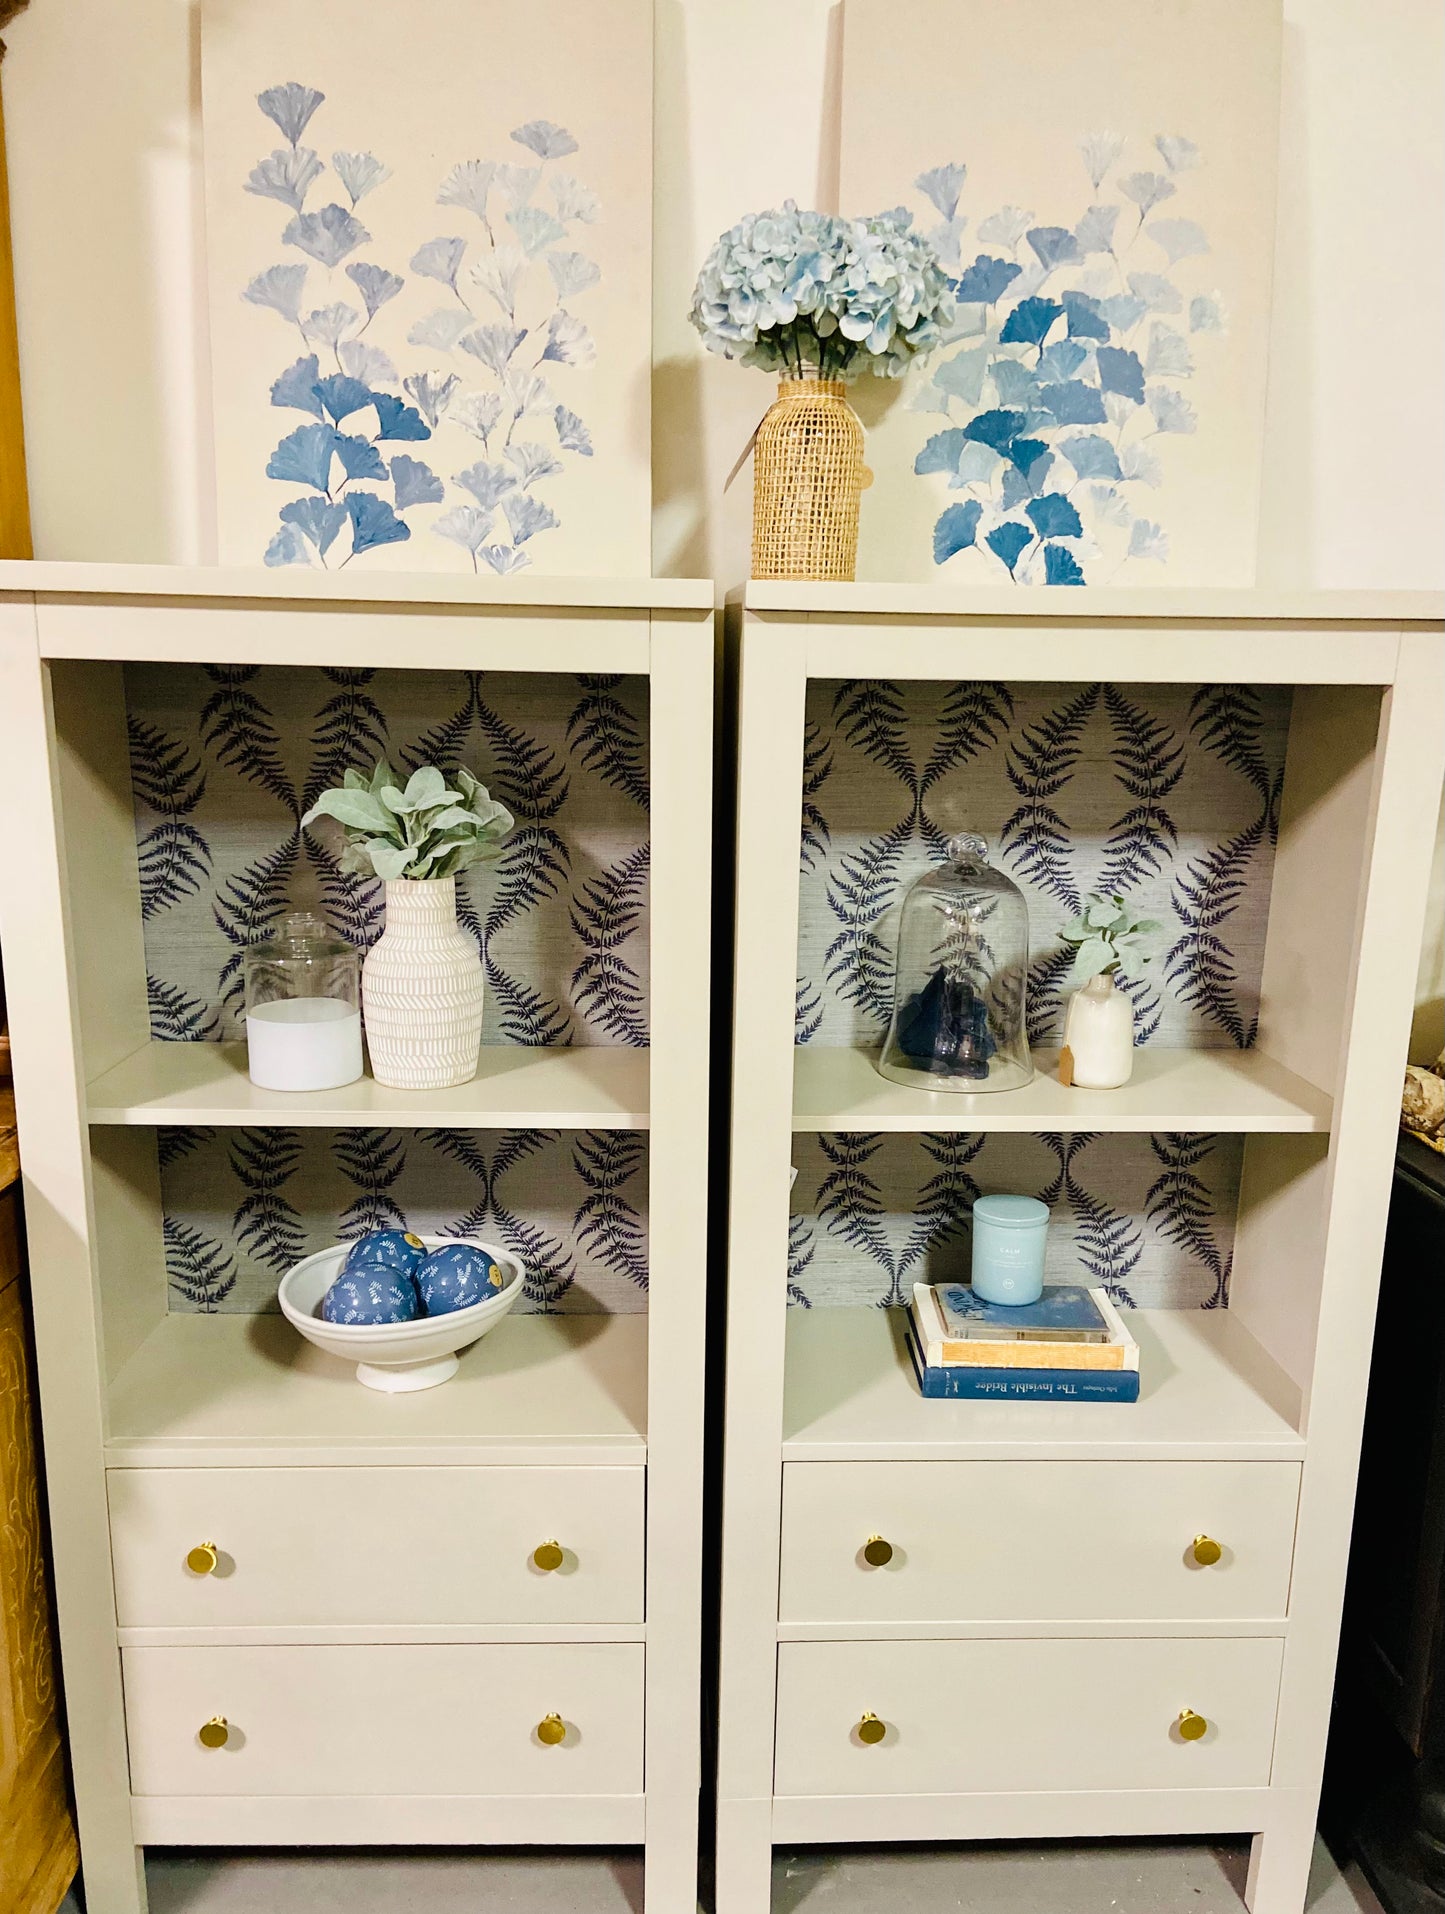 Vintage Refinished Pair of Small Bookshelves with Serena & Lily Grasscloth wallpaper